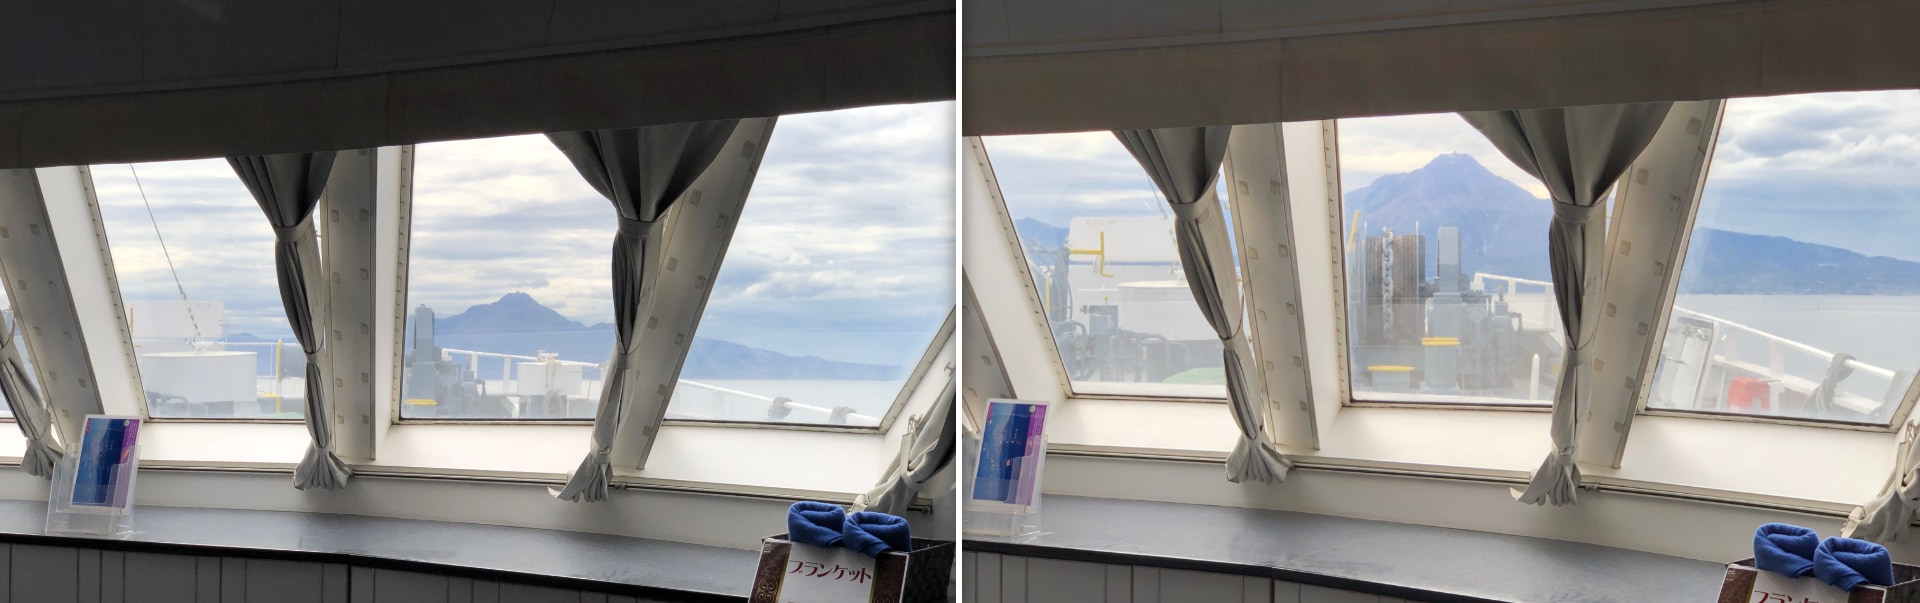 Two photos side-by-side showing Unzen through the window of the ferry getting bigger as we approach